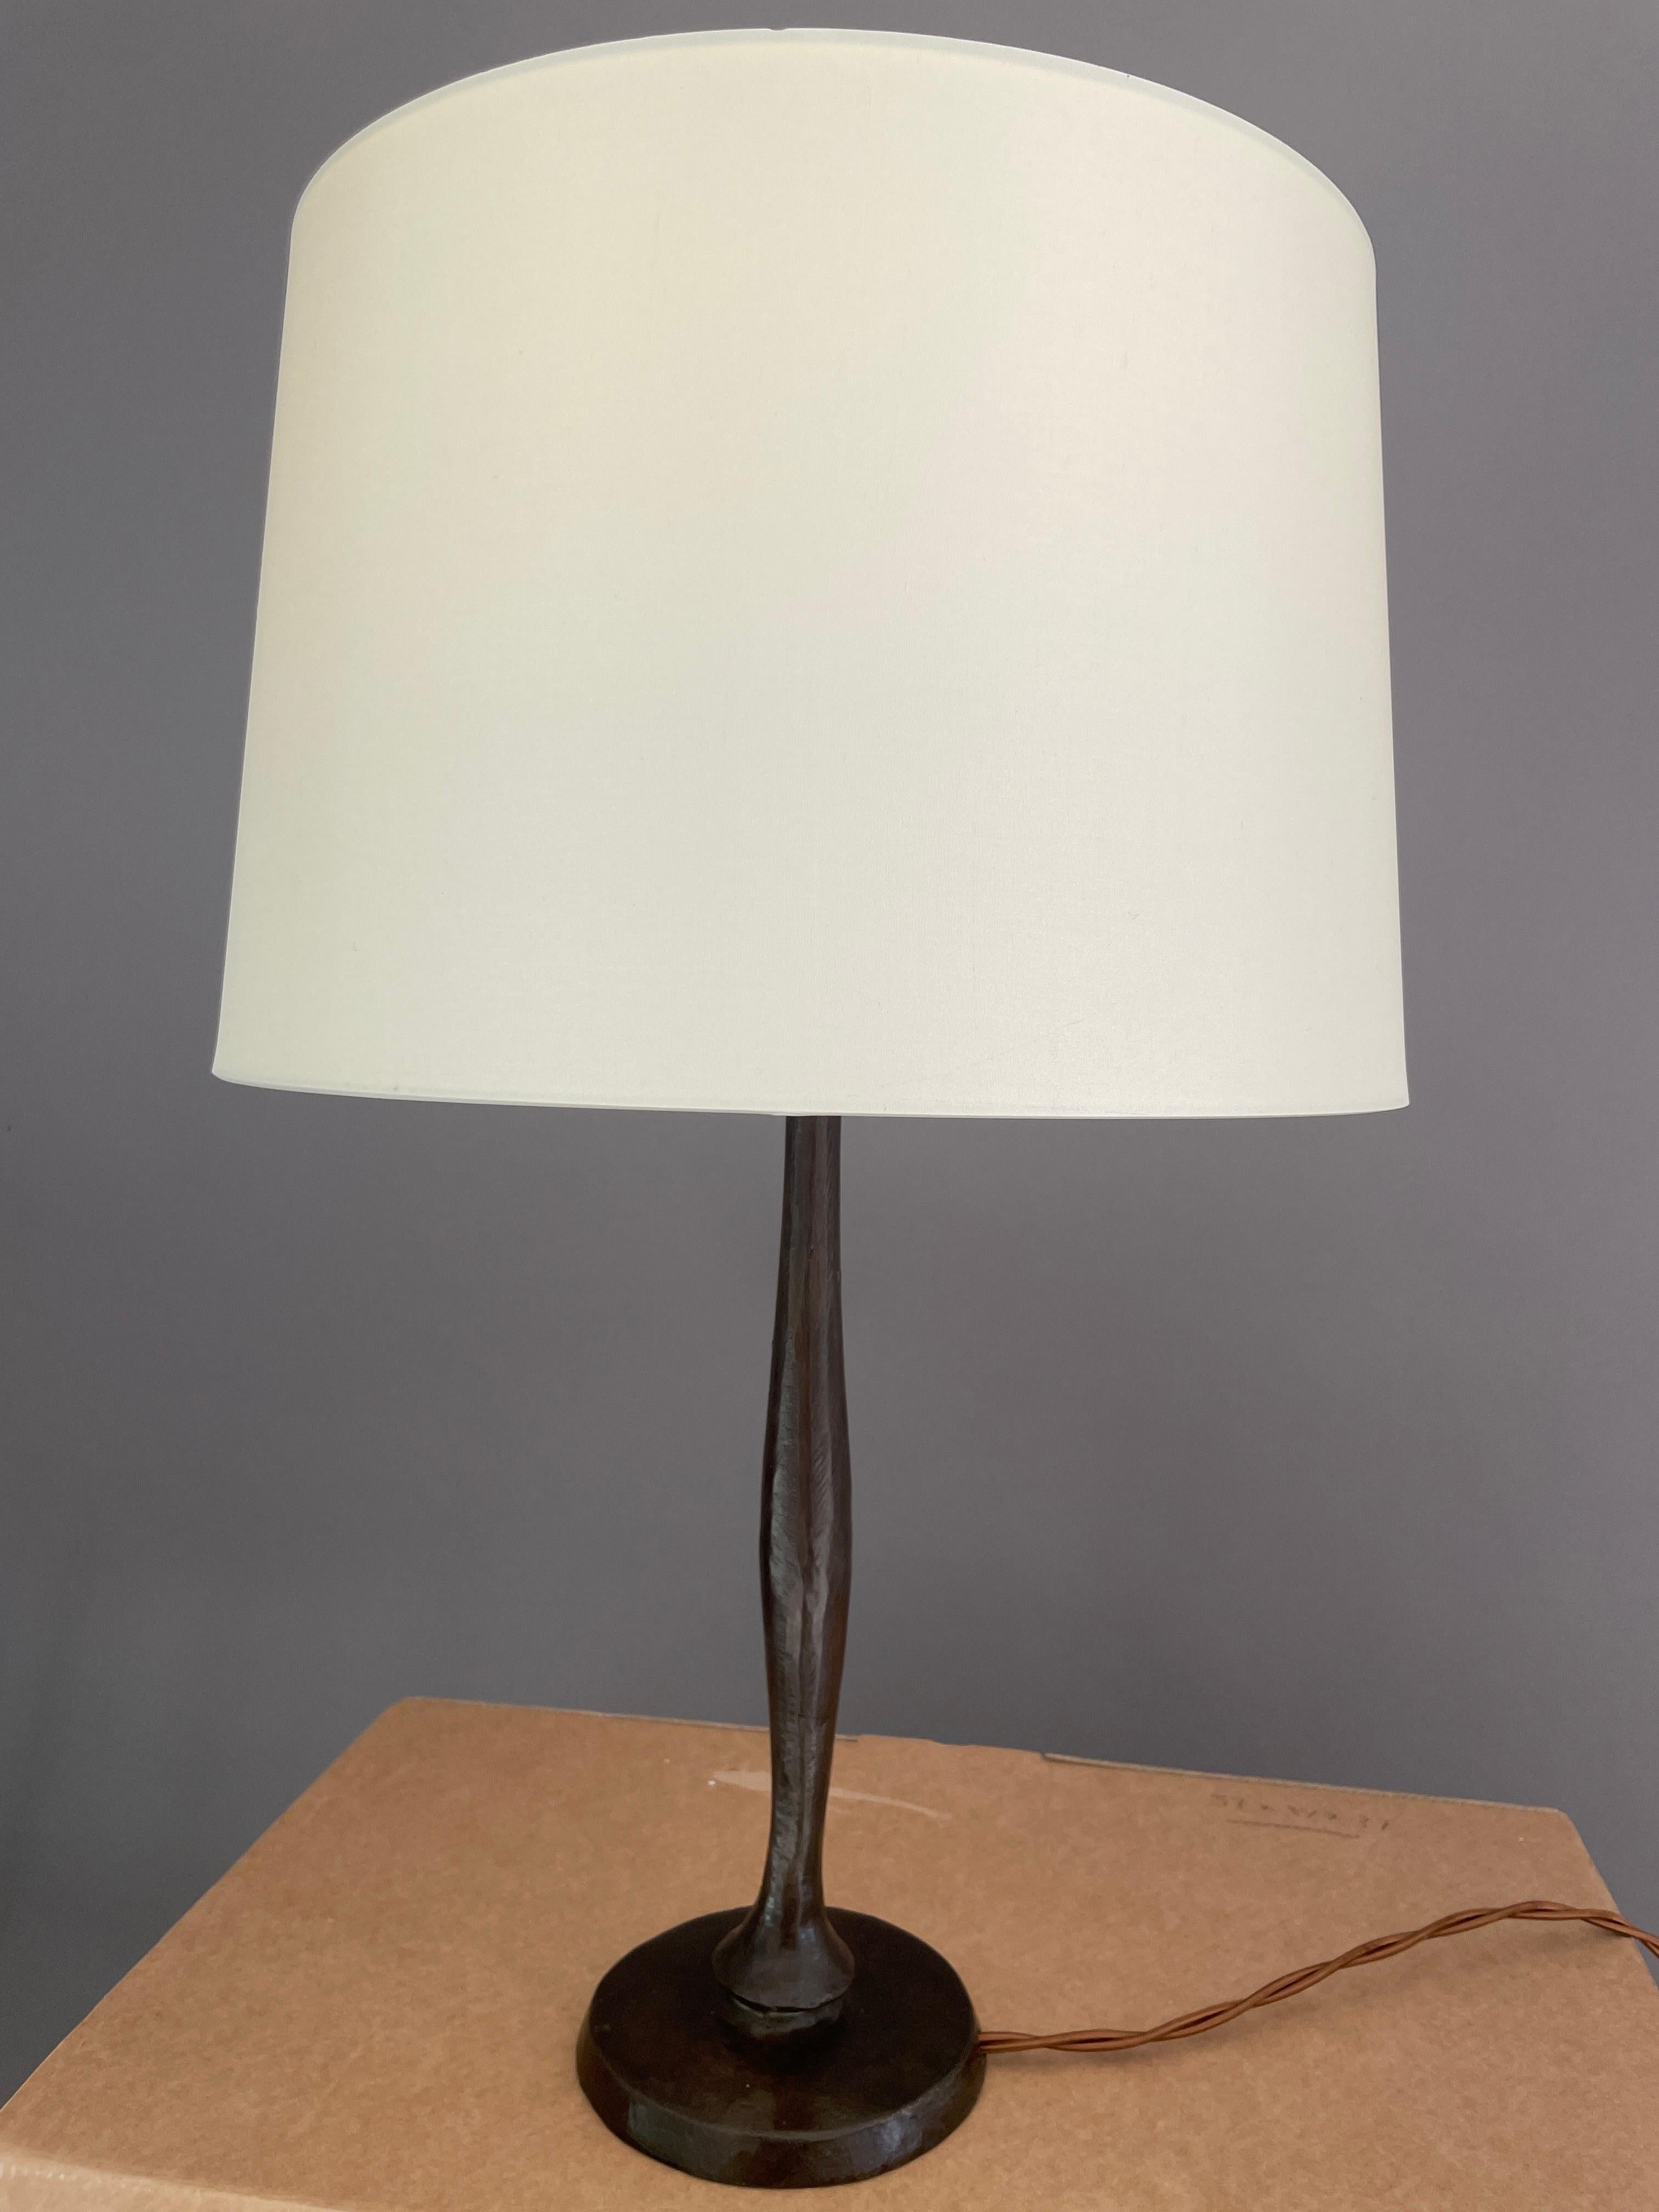 Contemporary Augustin Granet Table Lamp Solid Patinated Bronze Not Giacometti But, See Video For Sale